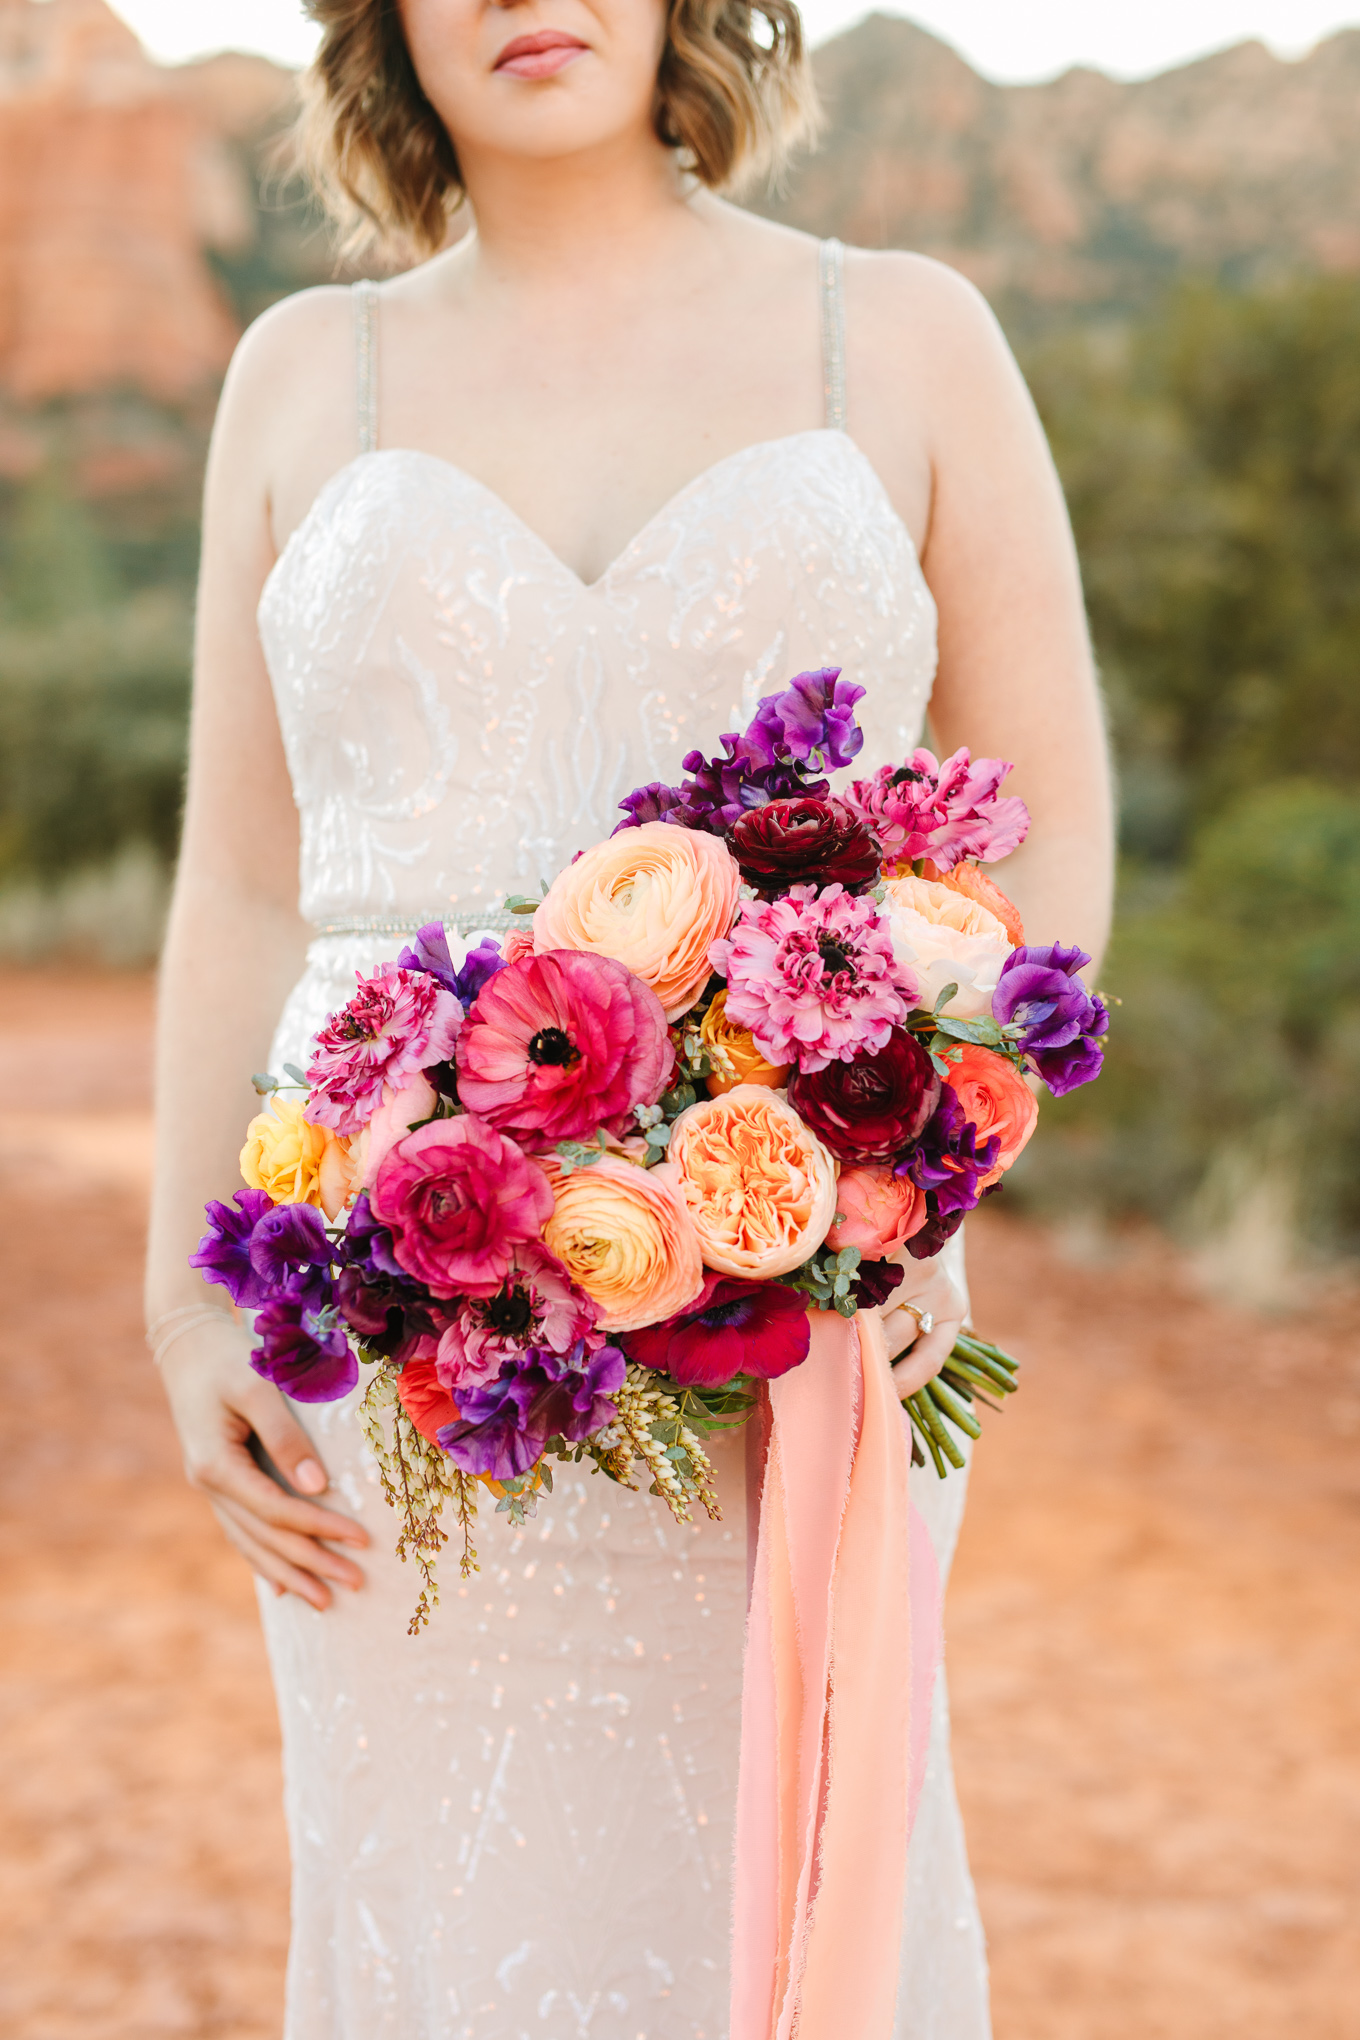 Vibrant sunset-inspired wedding flowers | Beautiful bridal bouquet inspiration and advice | Colorful and elevated wedding photography for fun-loving couples in Southern California | #weddingflowers #weddingbouquet #bridebouquet #bouquetideas #uniquebouquet   Source: Mary Costa Photography | Los Angeles